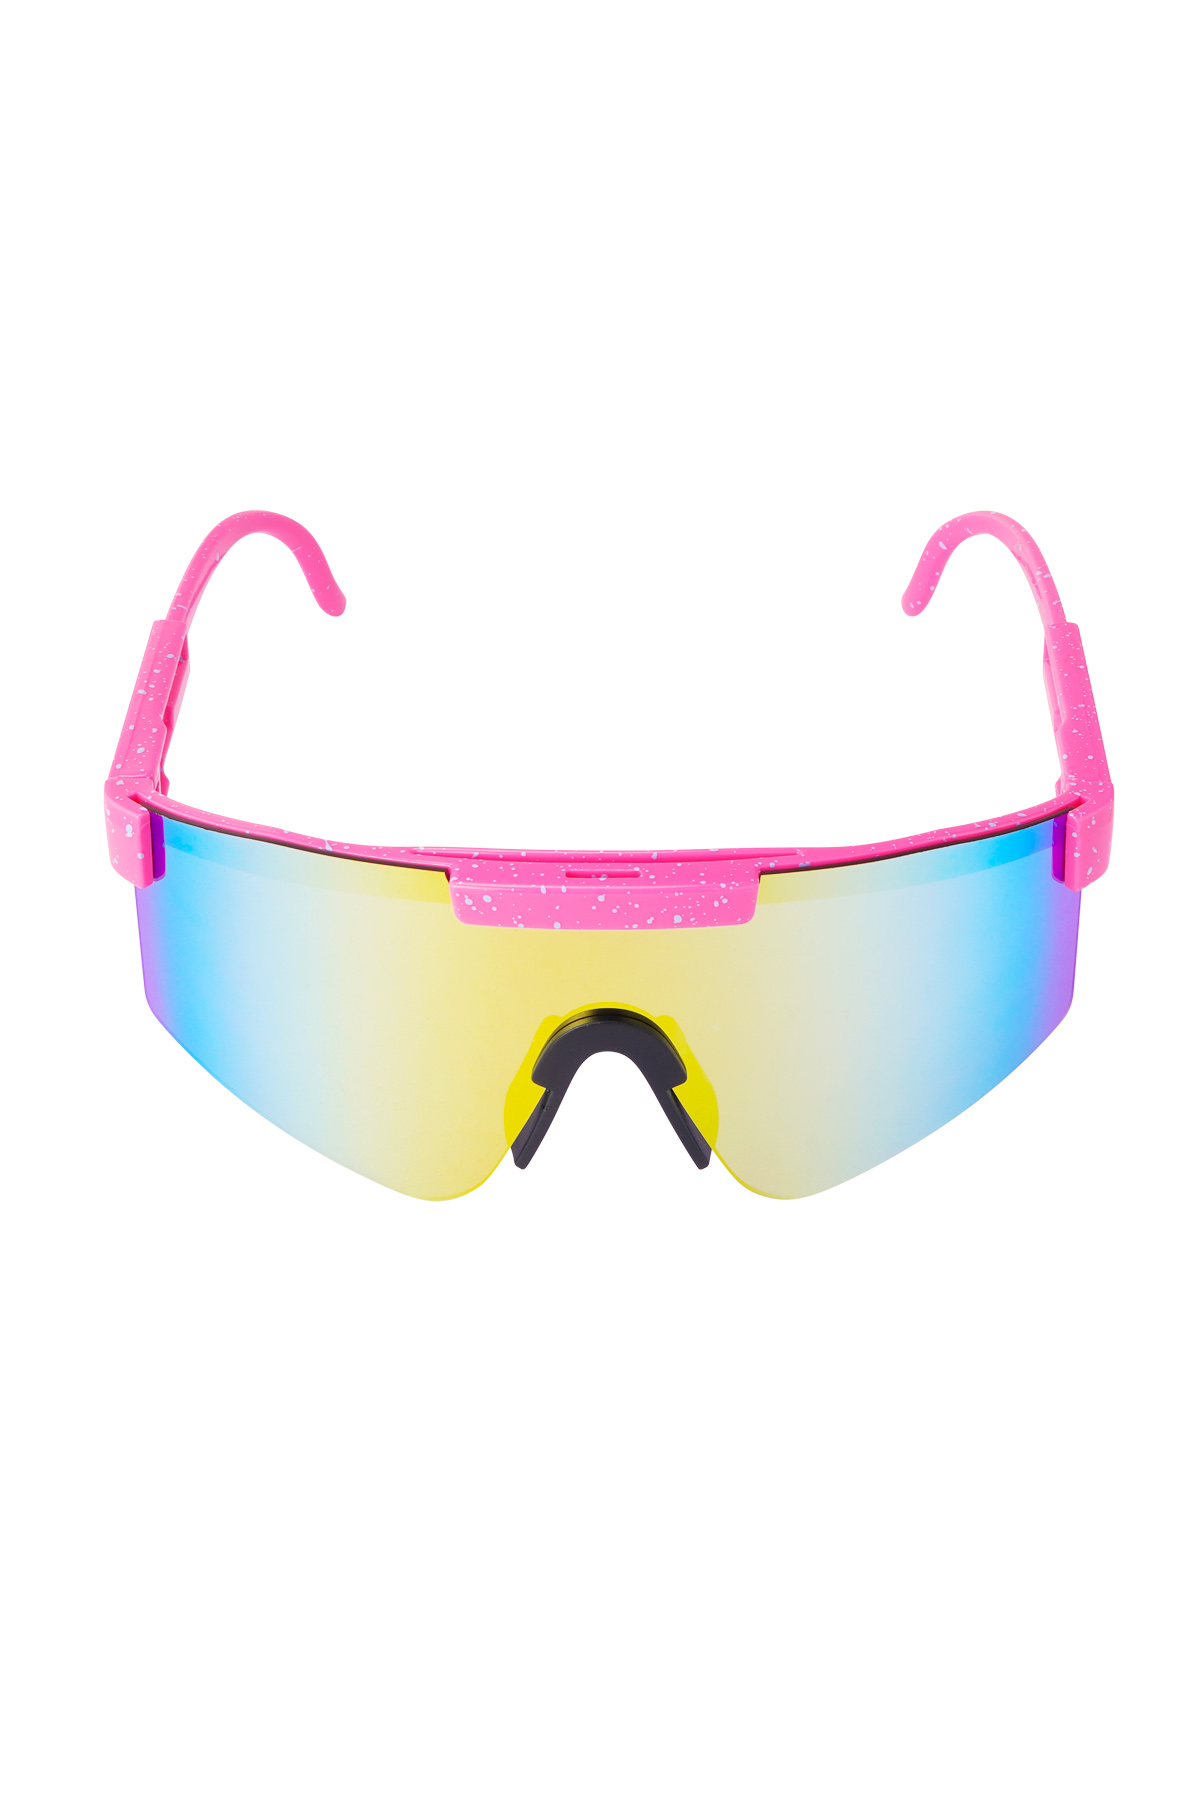 Sunglasses print colored lenses - pink h5 Picture6